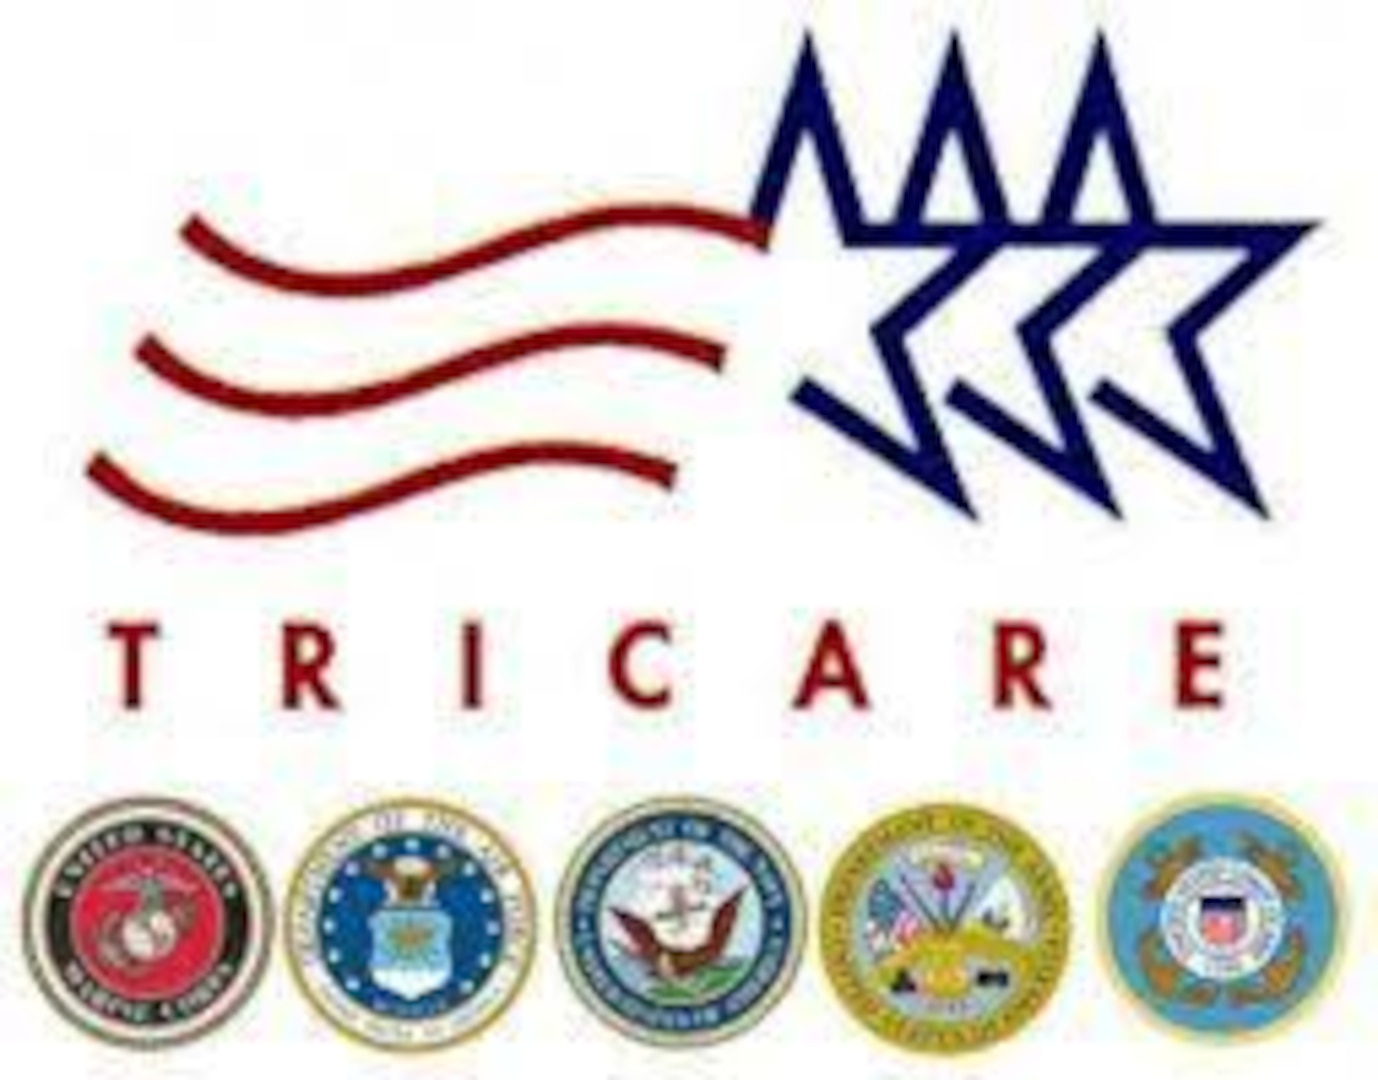 The Defense Health Agency (DHA) announced that TRICARE beneficiaries in Georgia may receive emergency prescription refills now through Sept. 8, 2023, due to Hurricane Idalia. All counties are impacted.
To receive an emergency refill of prescription medications, TRICARE beneficiaries should take their prescription bottle to any TRICARE retail network pharmacy. If the bottle is unavailable or the label is damaged or missing, beneficiaries should contact Express Scripts, Inc., or their retail network pharmacy for assistance.